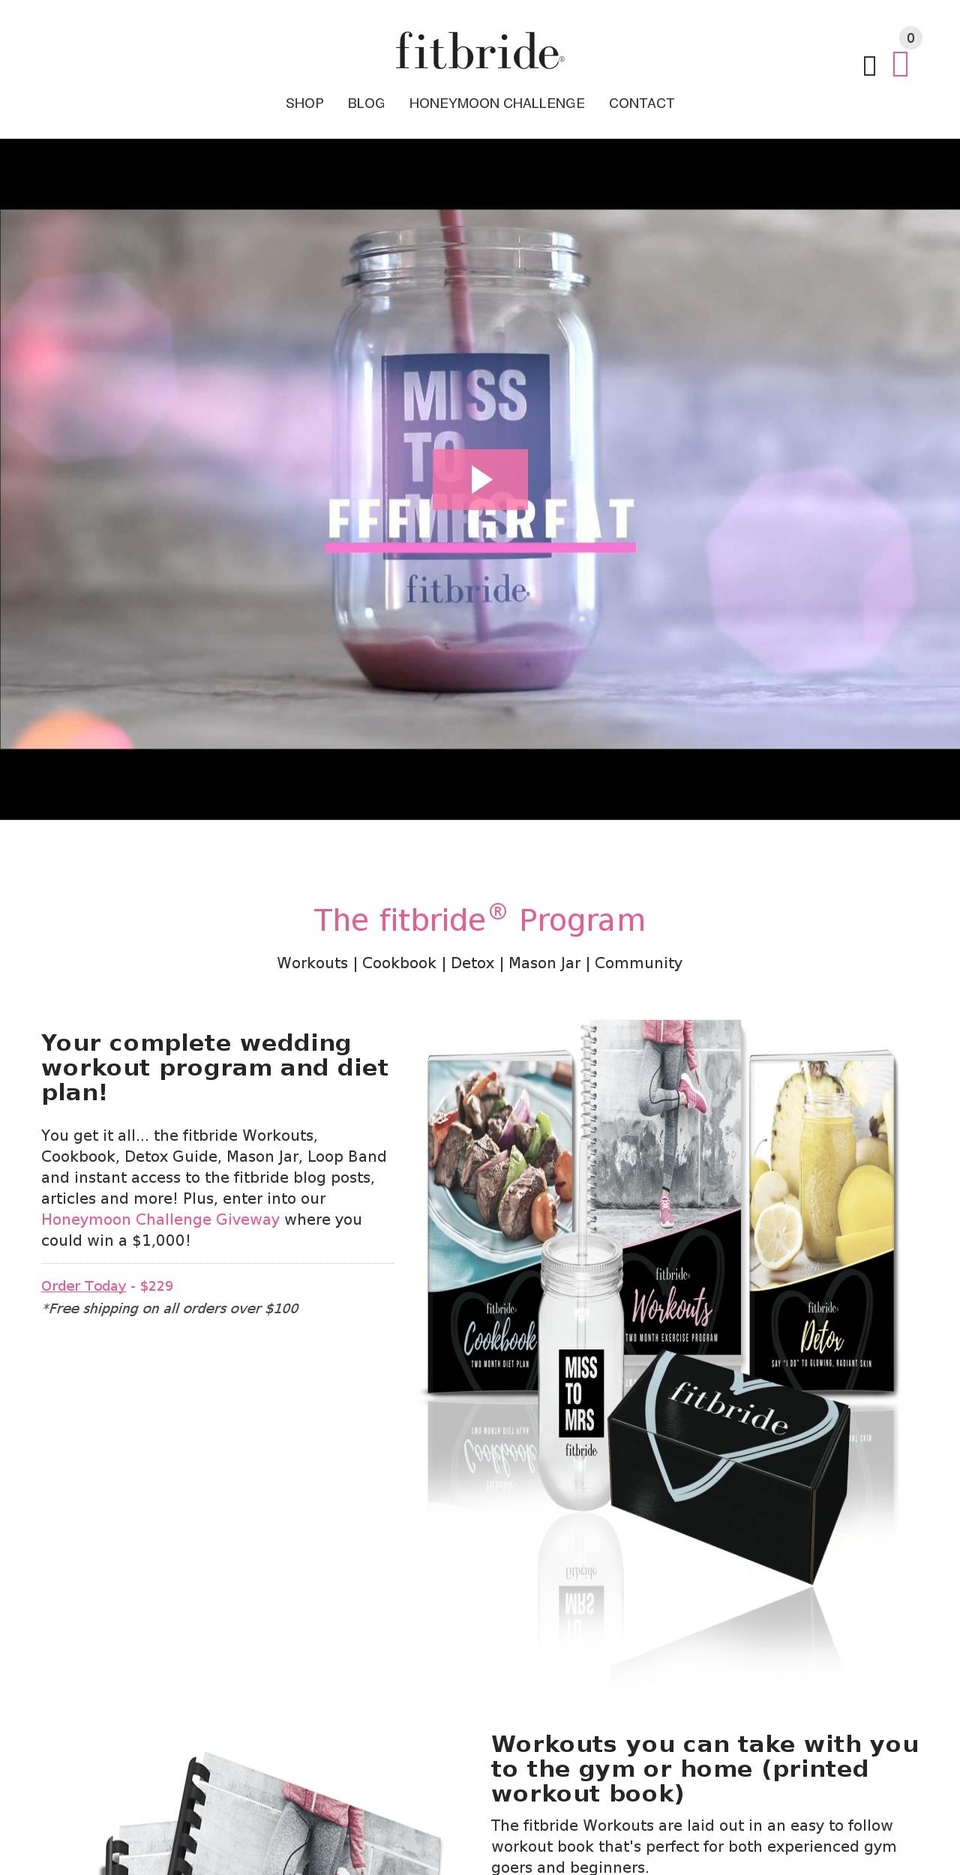 FitBride Development - YourStore Theme Shopify theme site example fitbridesmaid.com